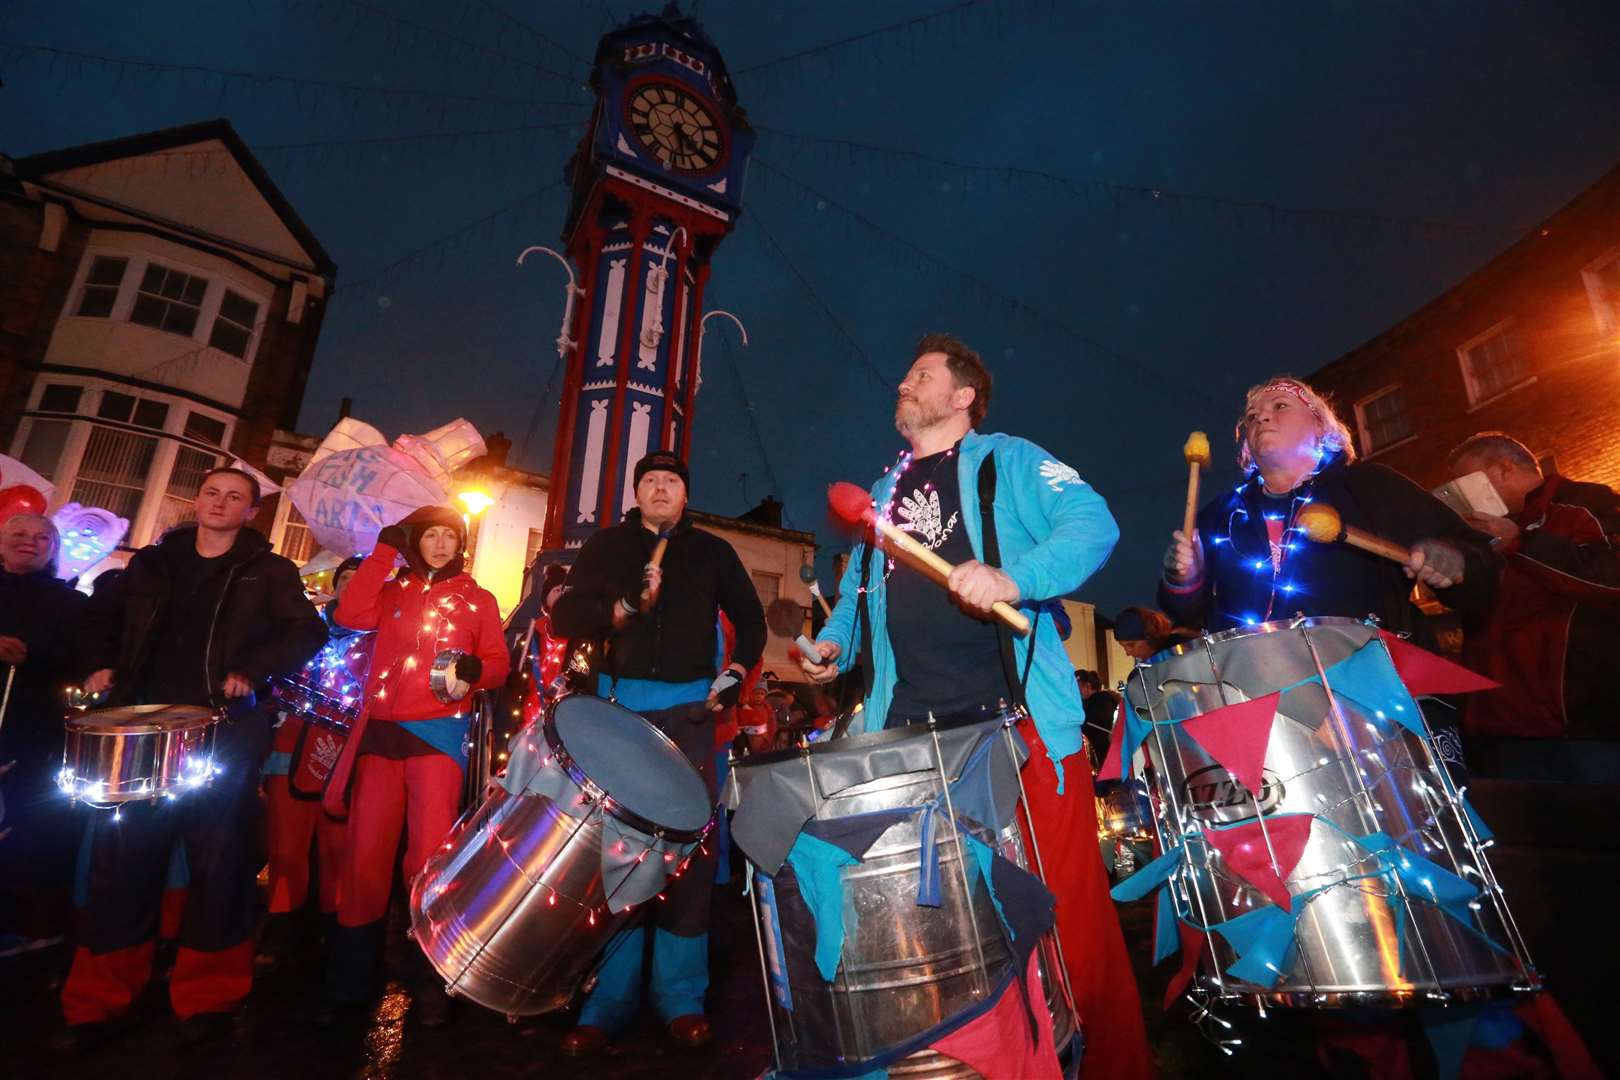 Members of the Samba band on the lantern parade at the Christmas Lights Switch on in Sheerness. Picture by: John Westhrop